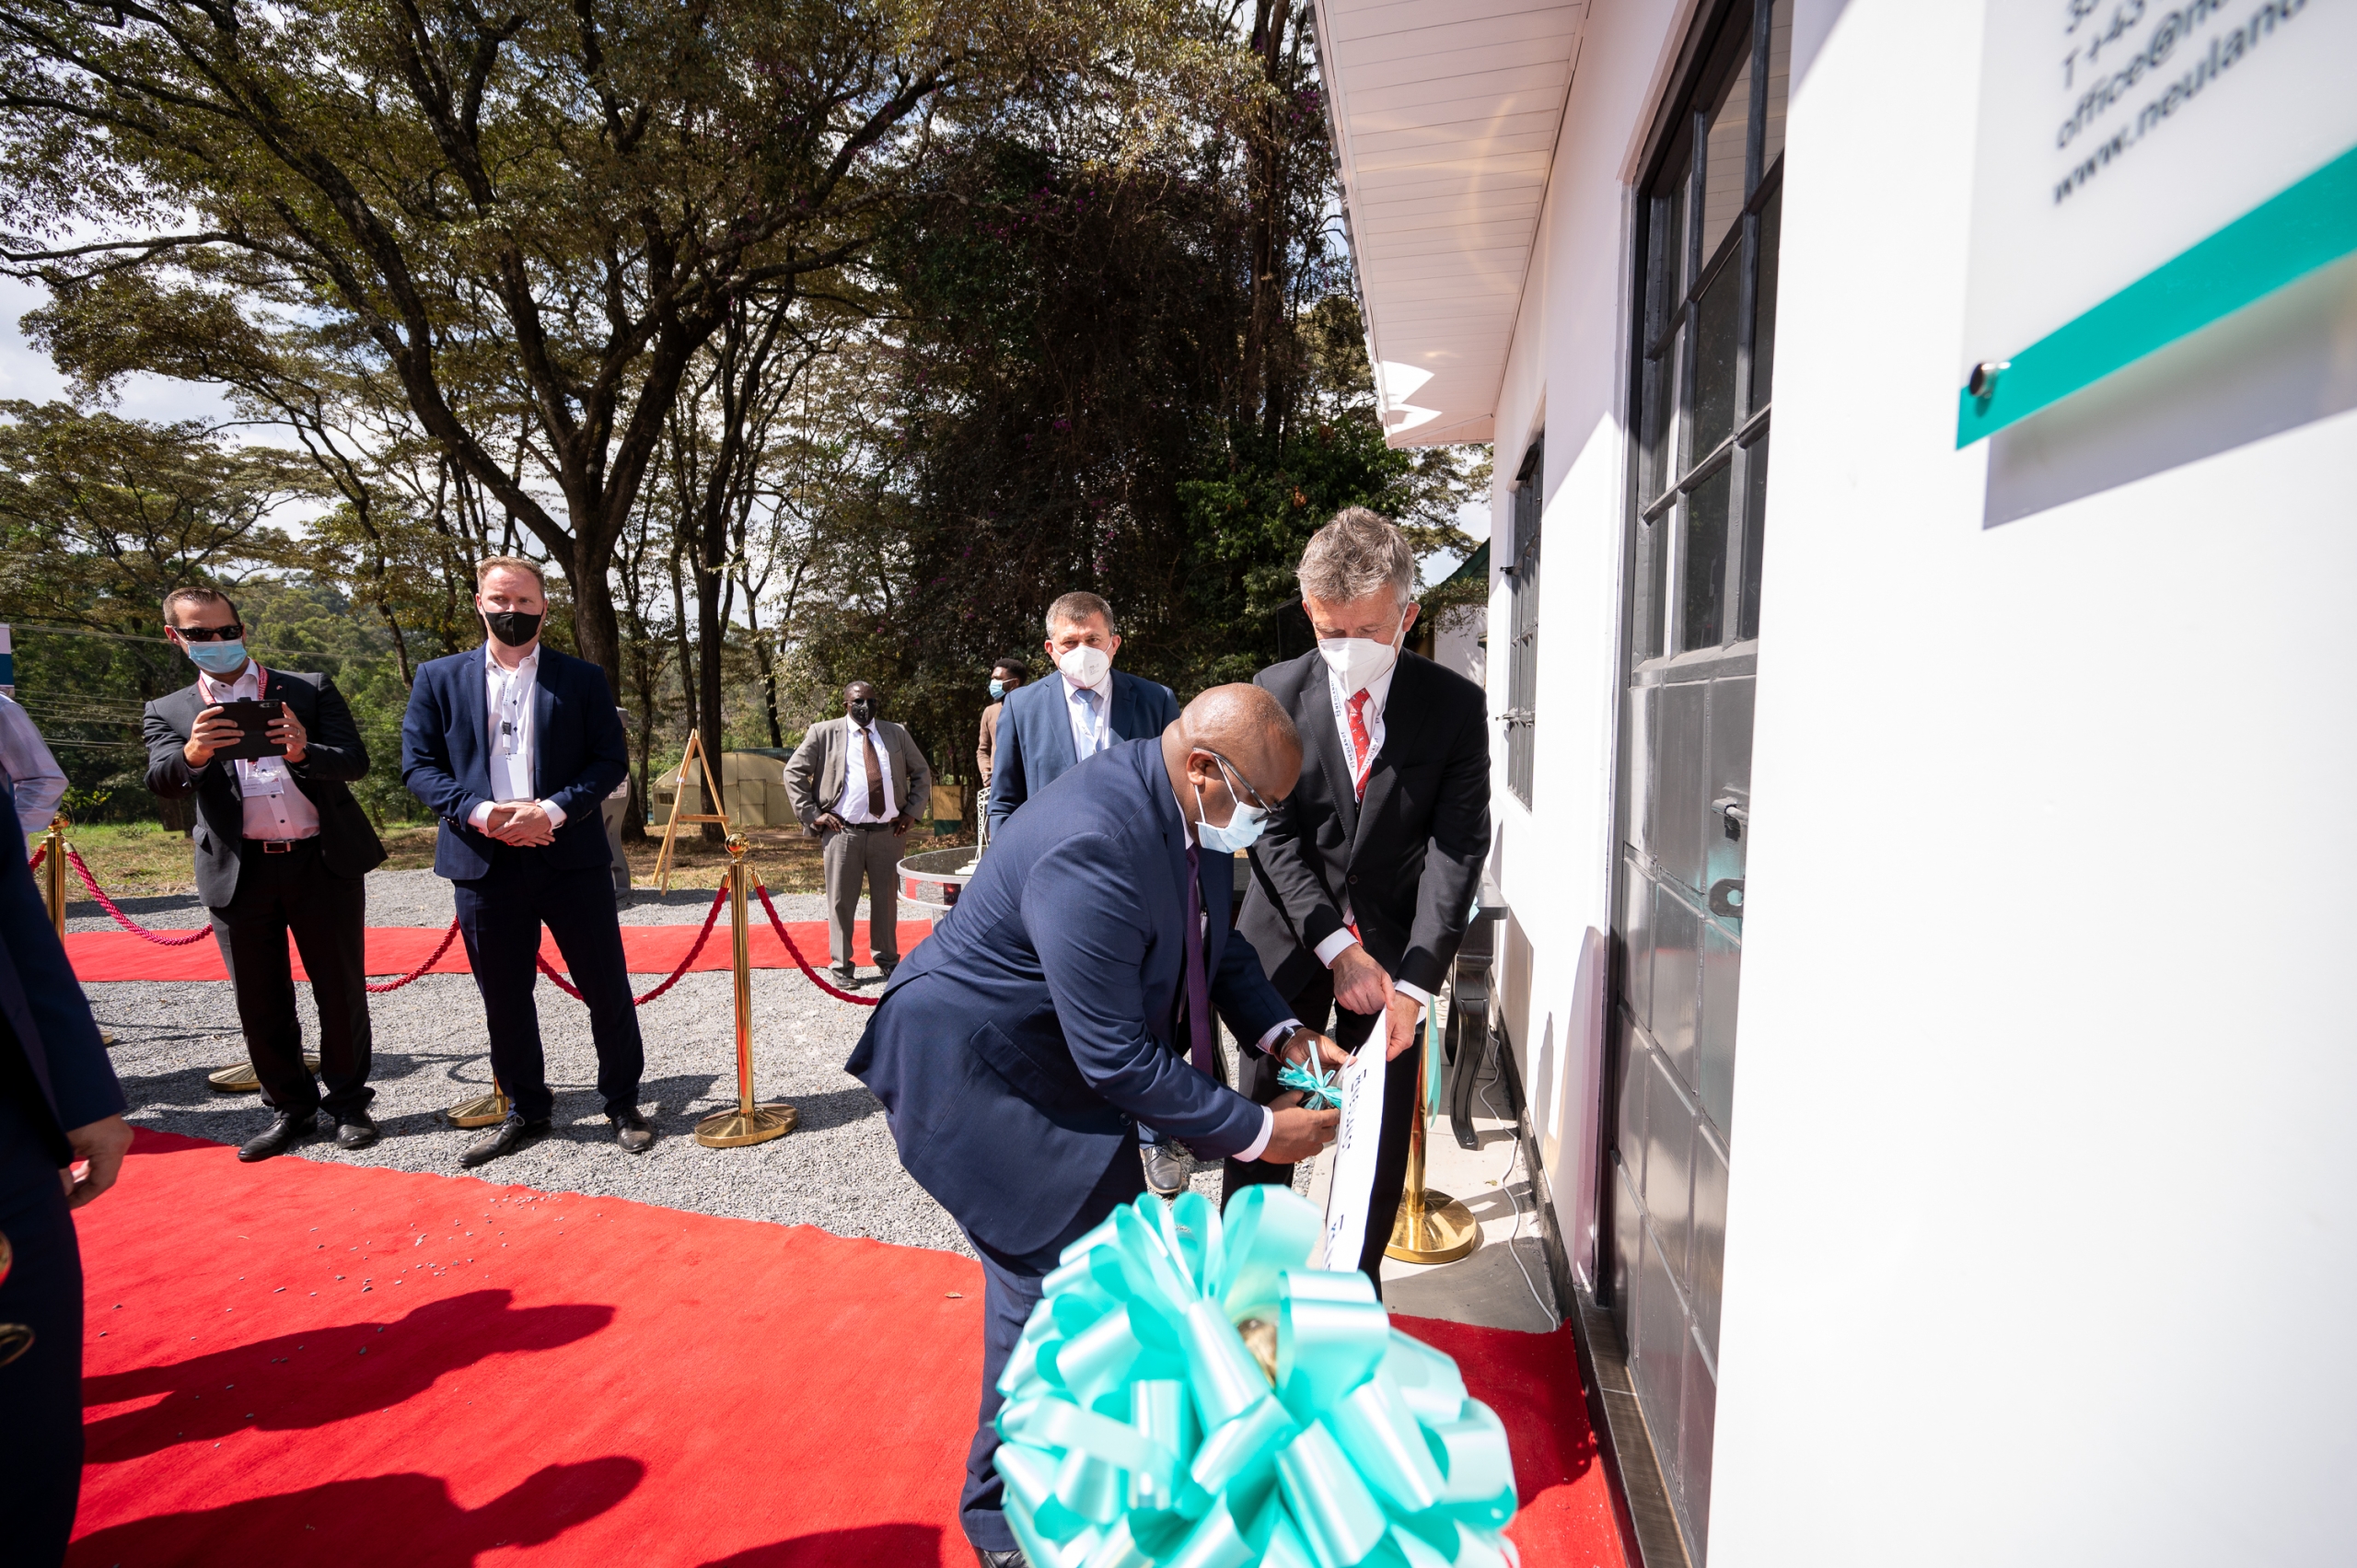 Businessman cuts the ribbon as the highlight of the opening ceremony in front of the entrance of the show house at the NCA show ground in Kenia